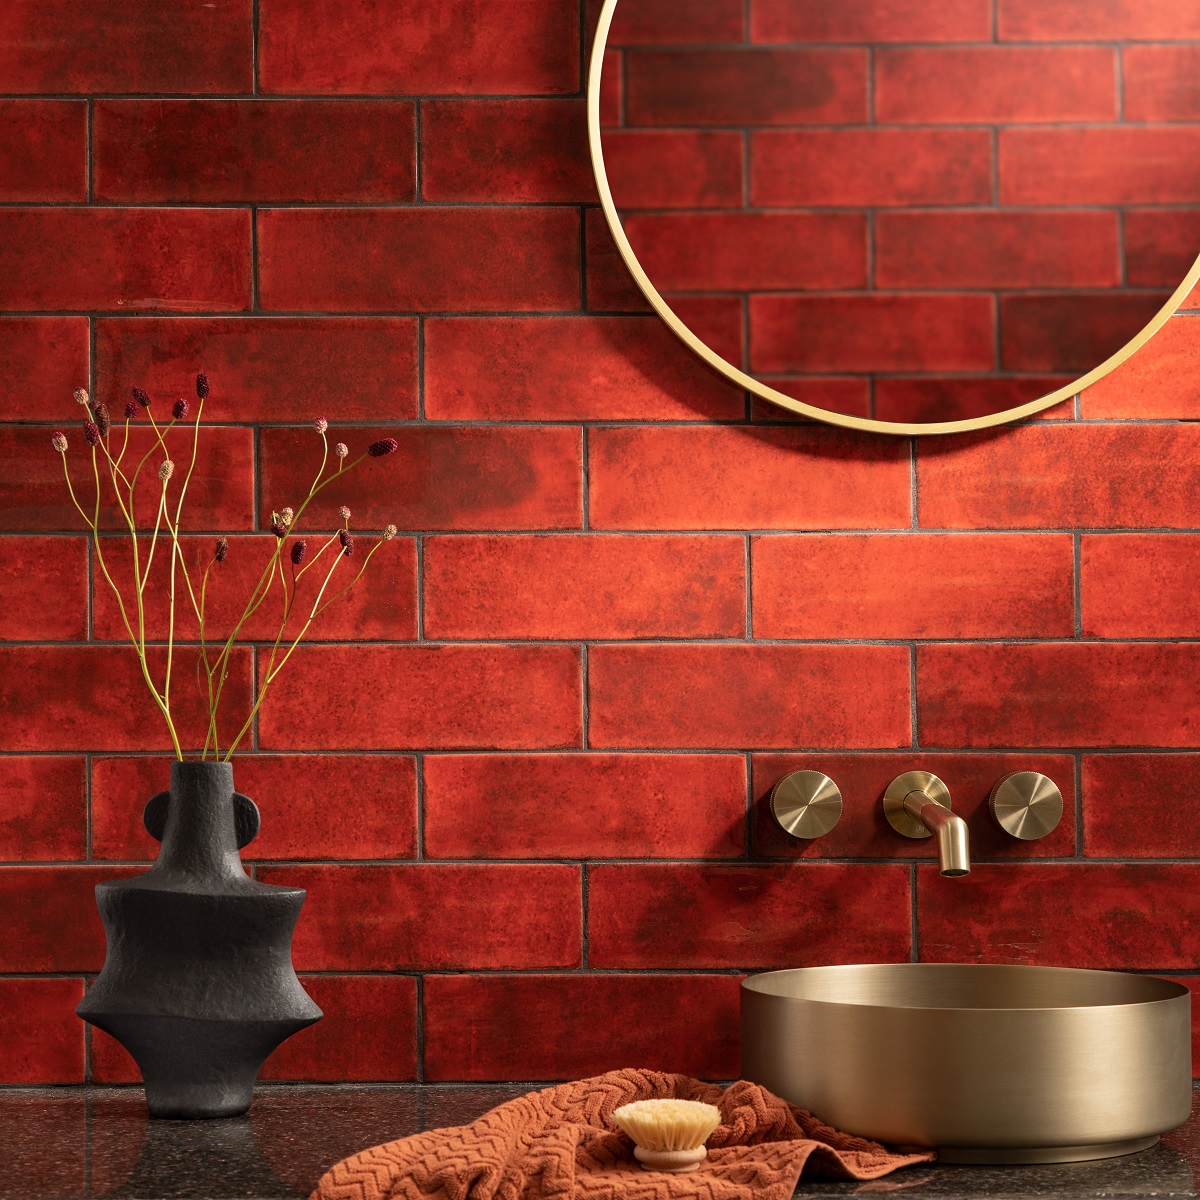 Titan red tiles from CTD Tiles behind brass bathroom fittings and a sculptural vase